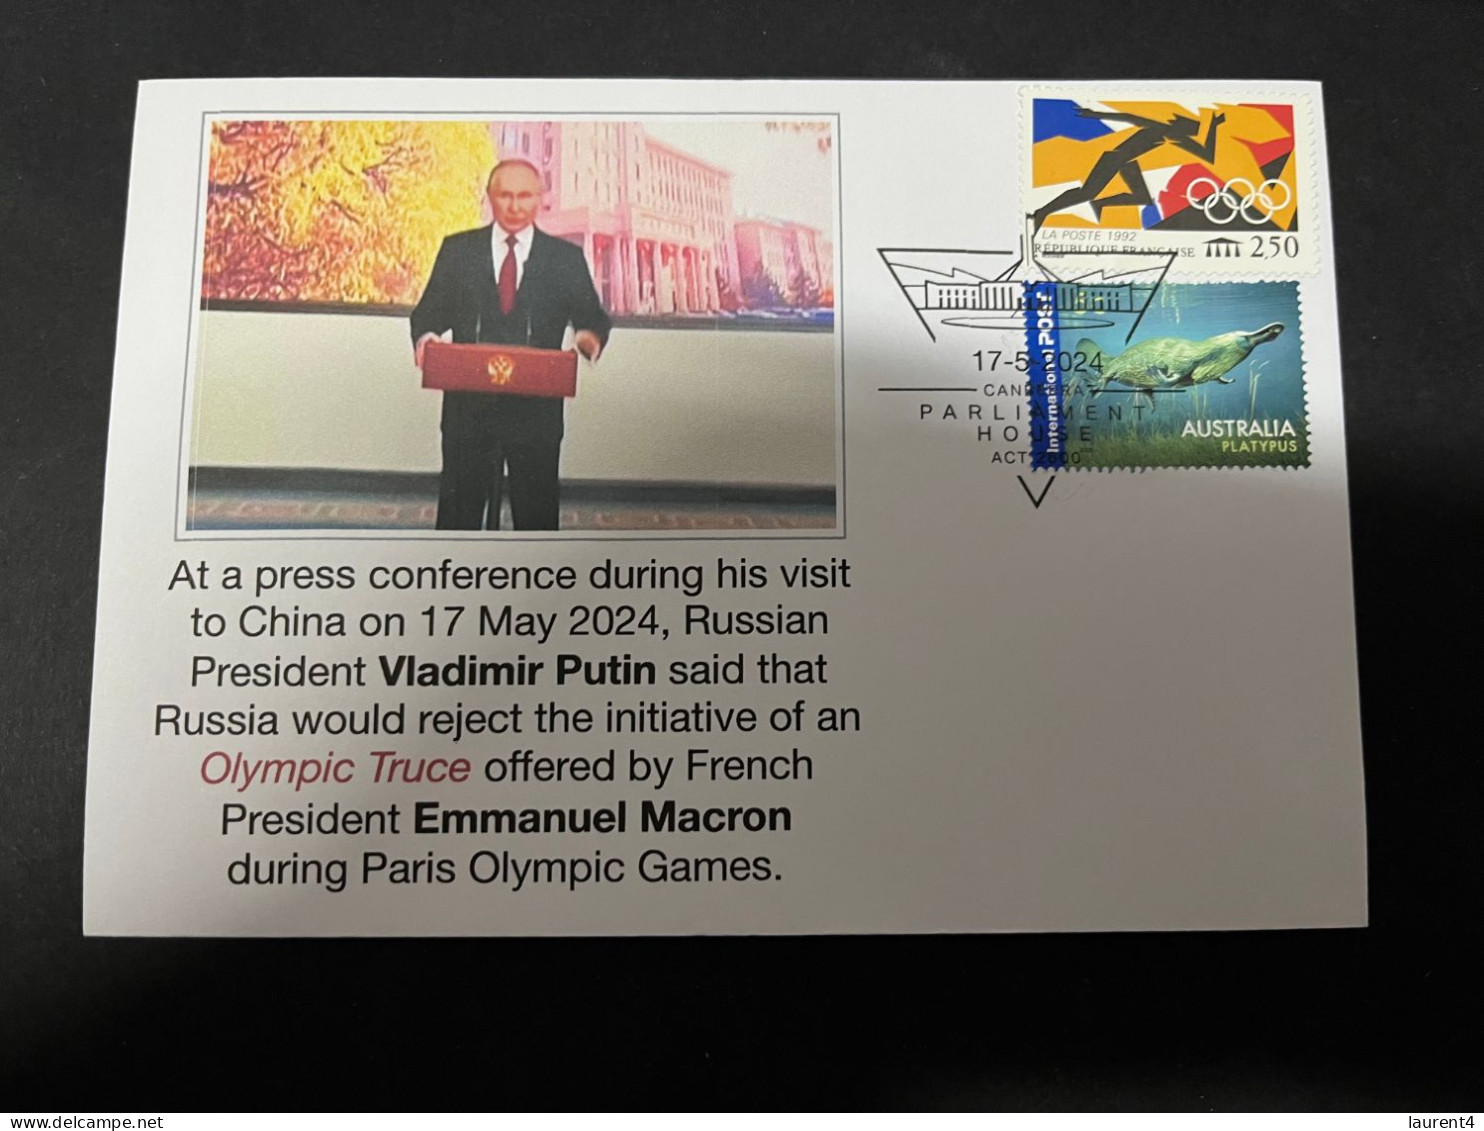 19-5-2024 (5 Z 27) Russian President Putin Said That Russia Would Reject "Oympic Truce" During The 2024 Olympic Games - Summer 2024: Paris